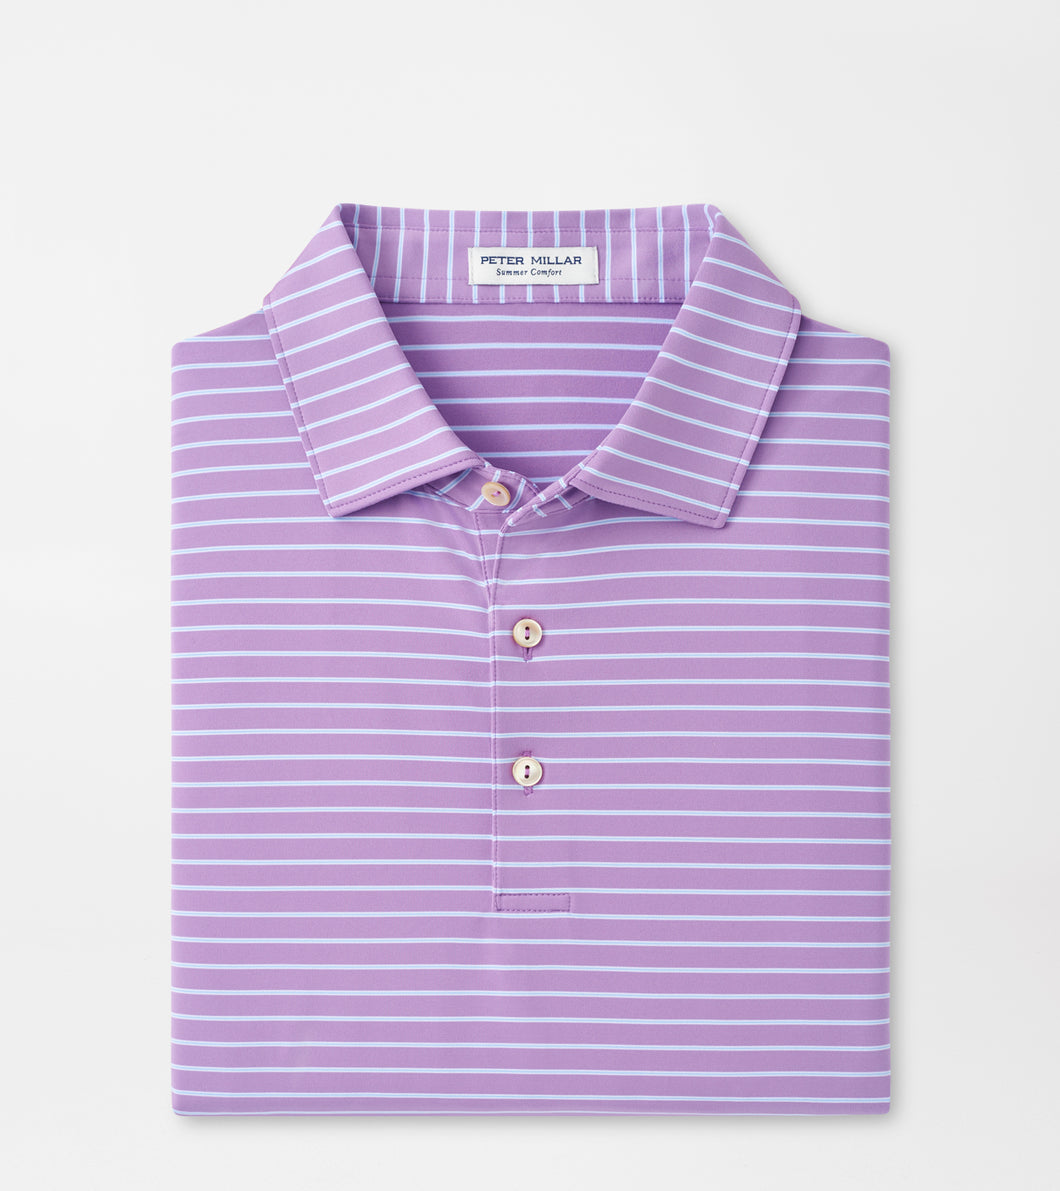 Peter Millar Drum Performance Jersey Polo in Dragonfly